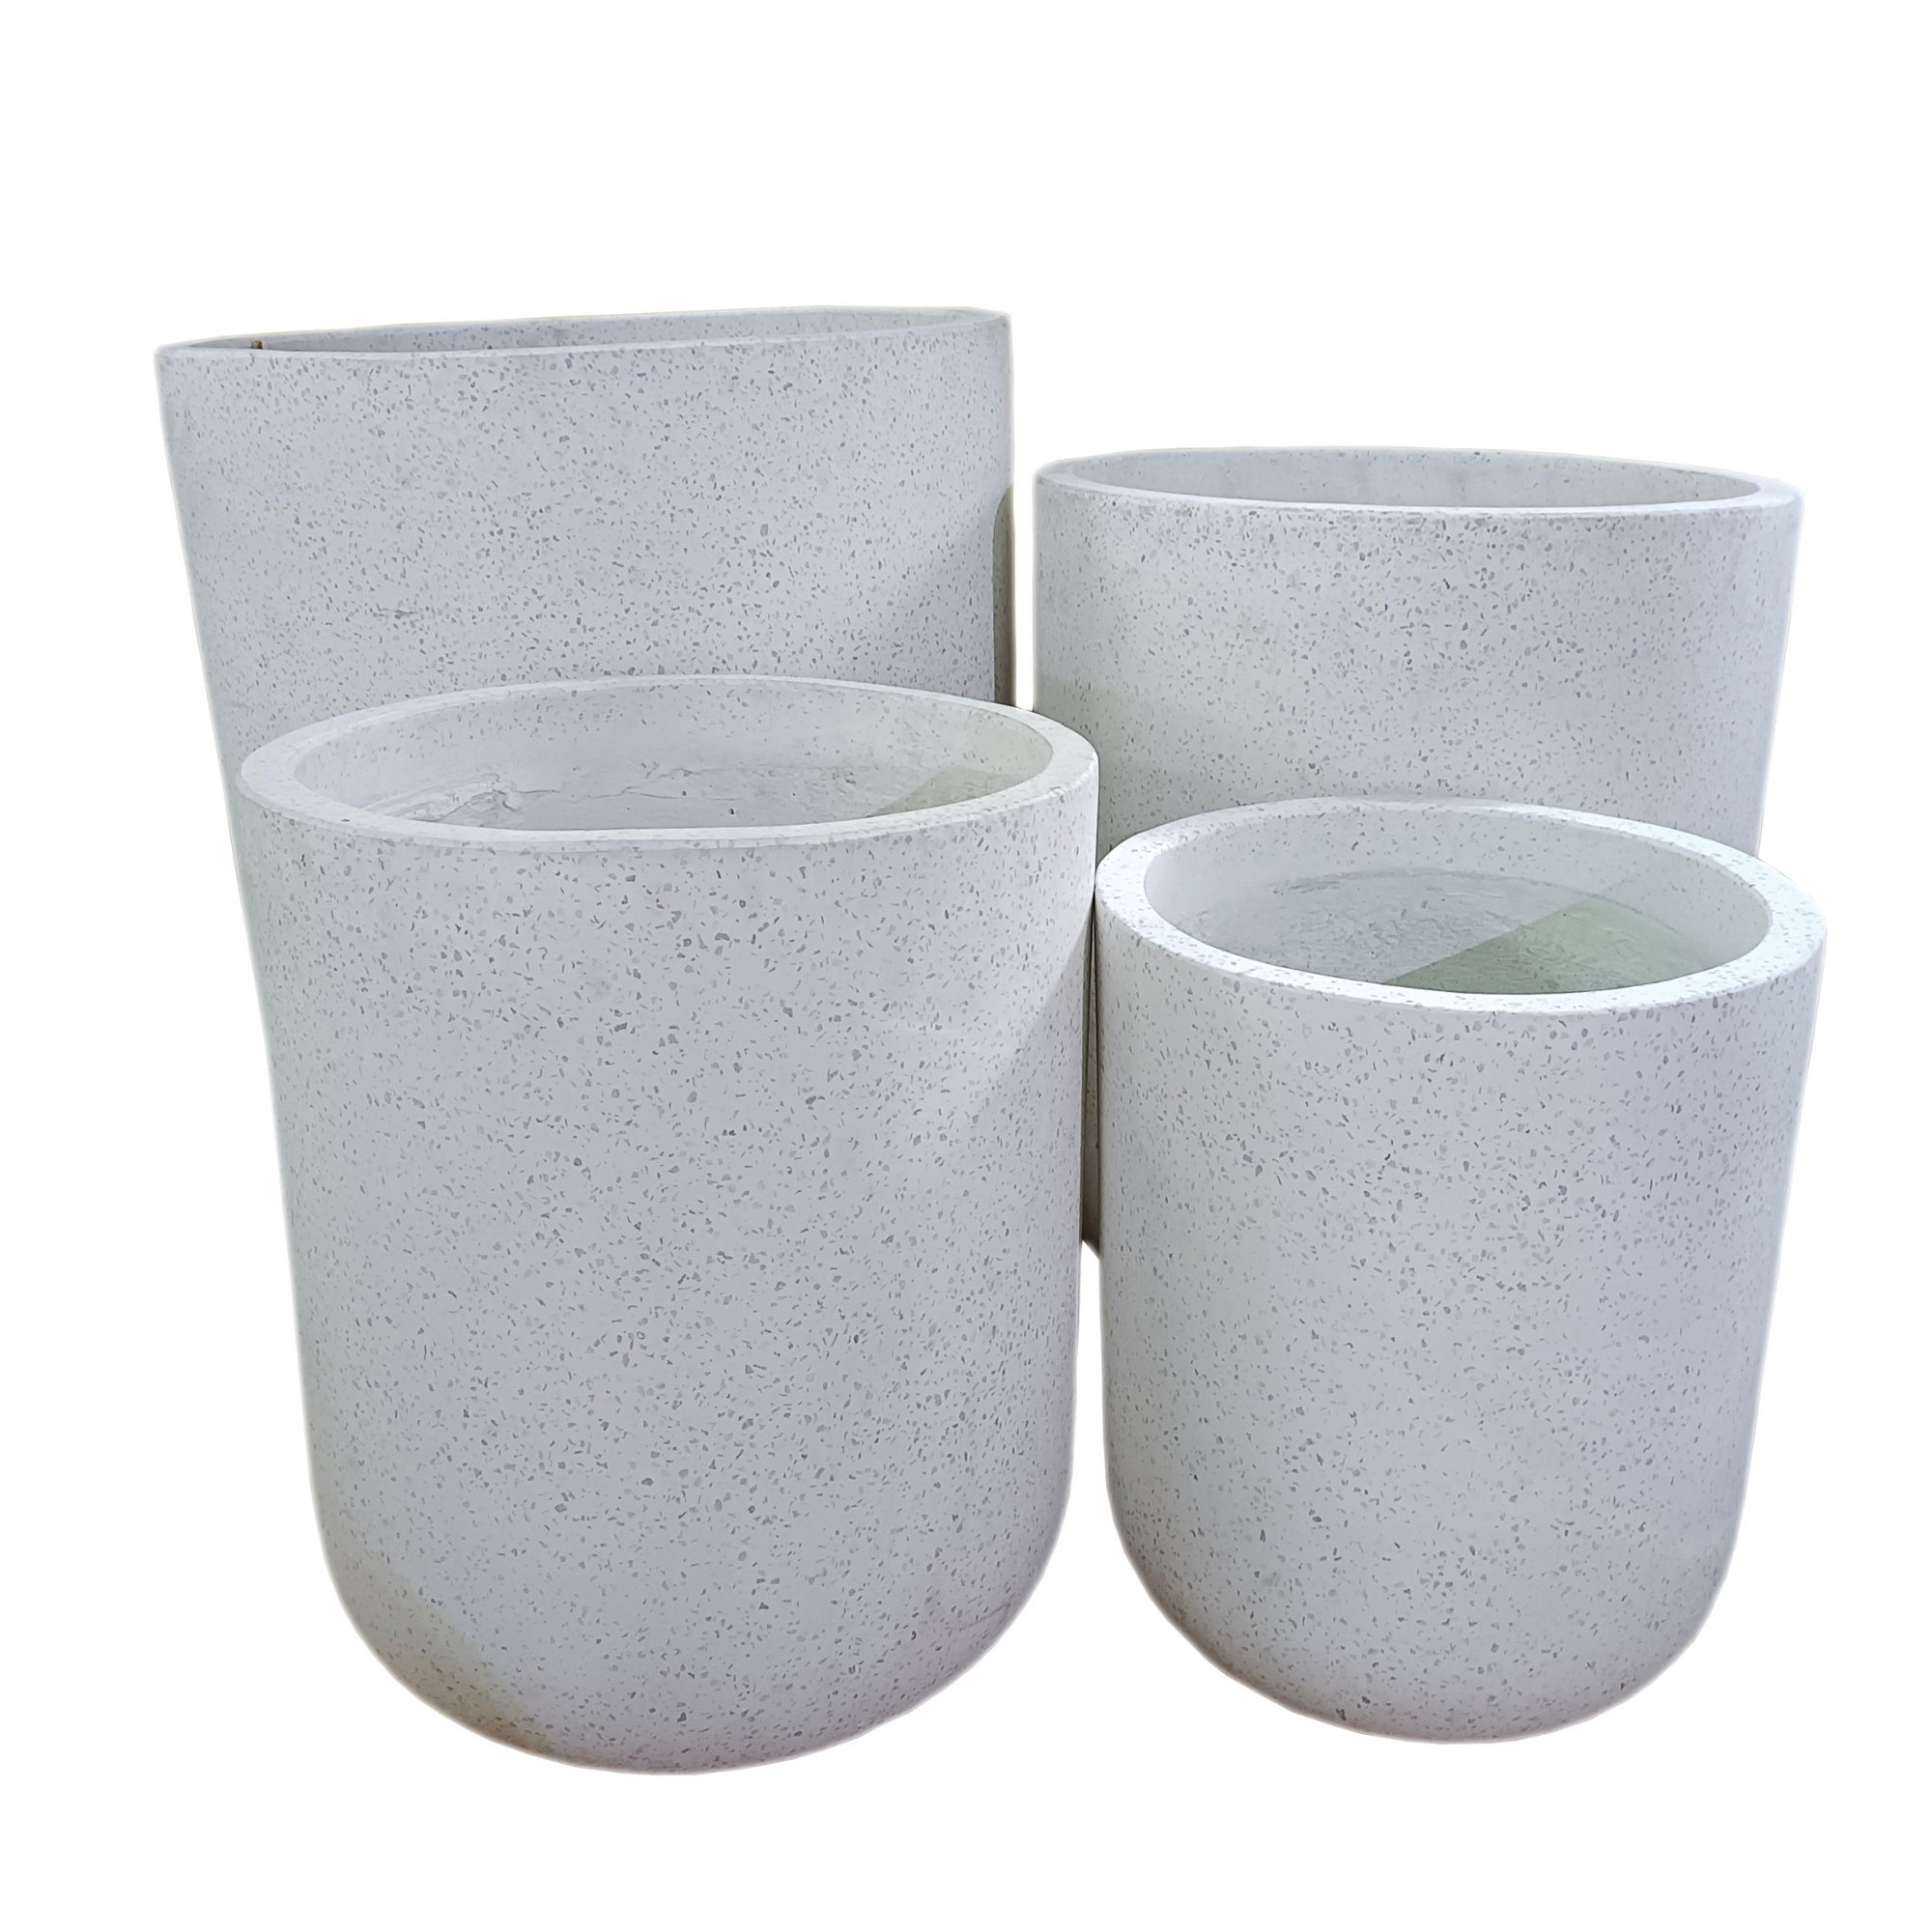 White Terrazzo Indoor/Outdoor Plant Pot By Roots40W*40D*47H. (8785190748481)